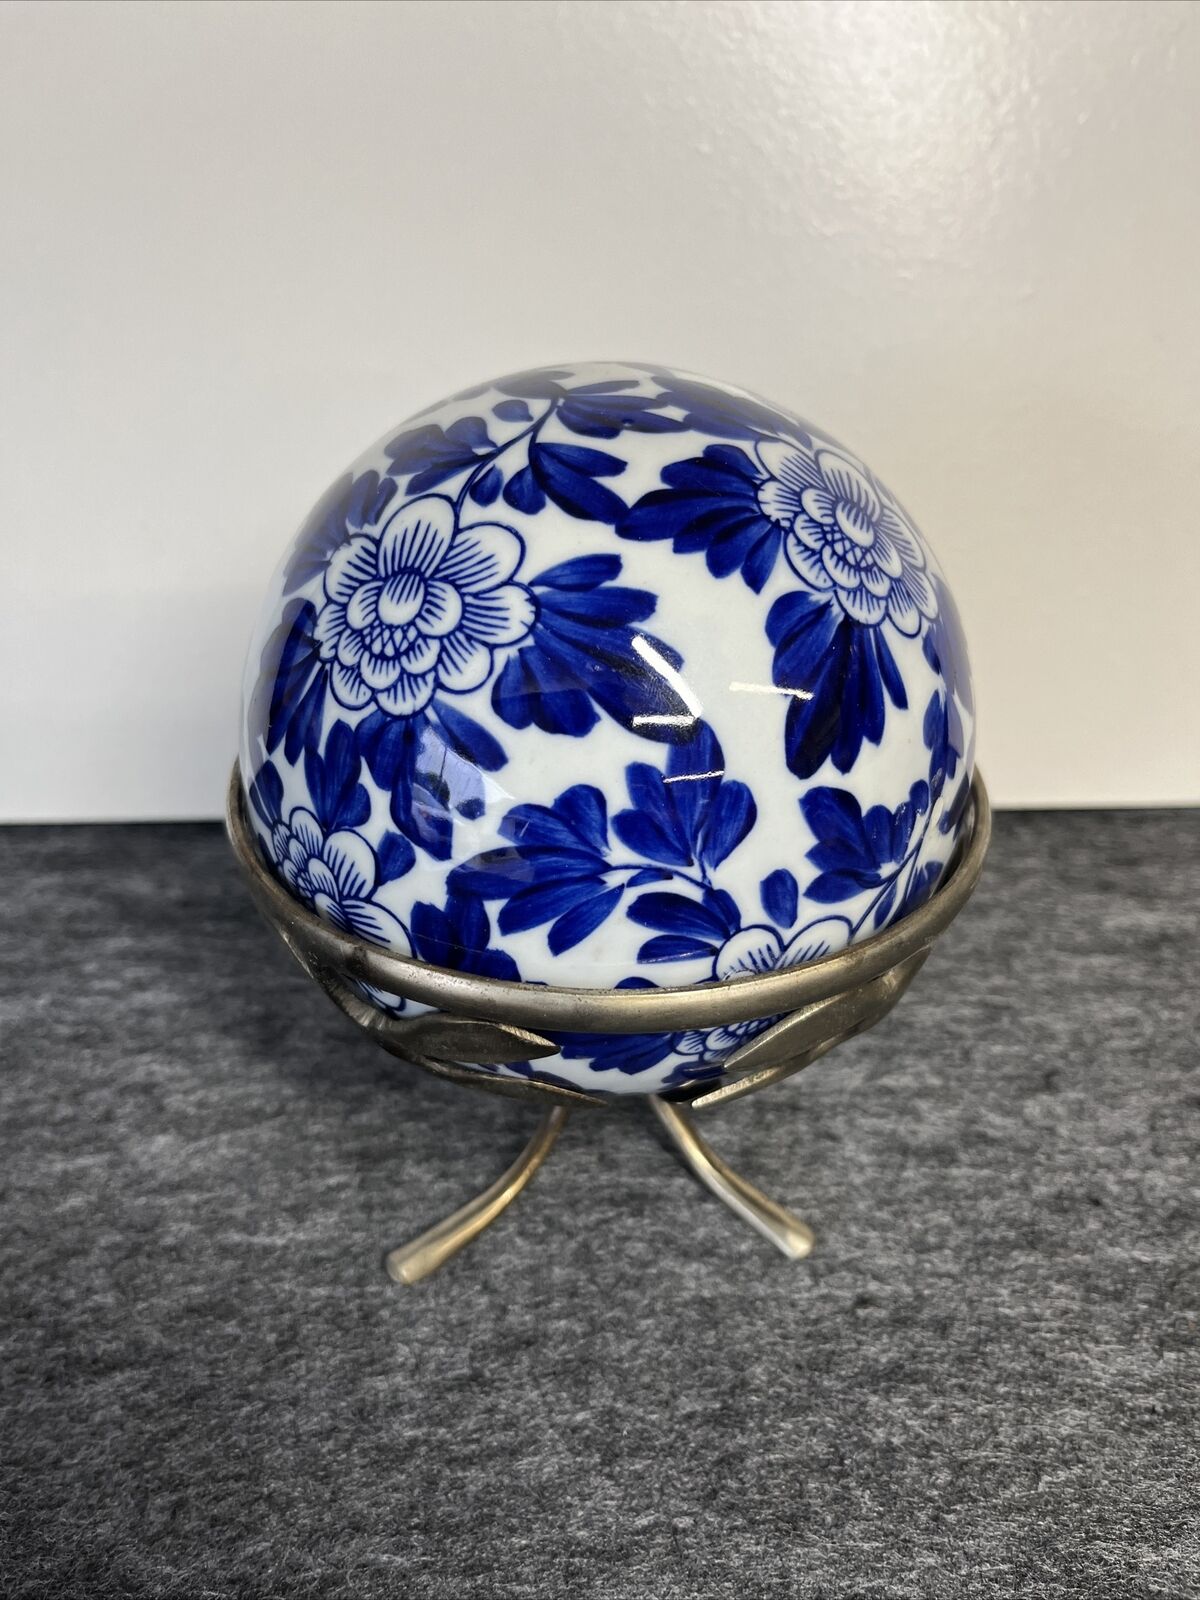 Vintage Cobalt Blue and White Gazing Ball On Stand